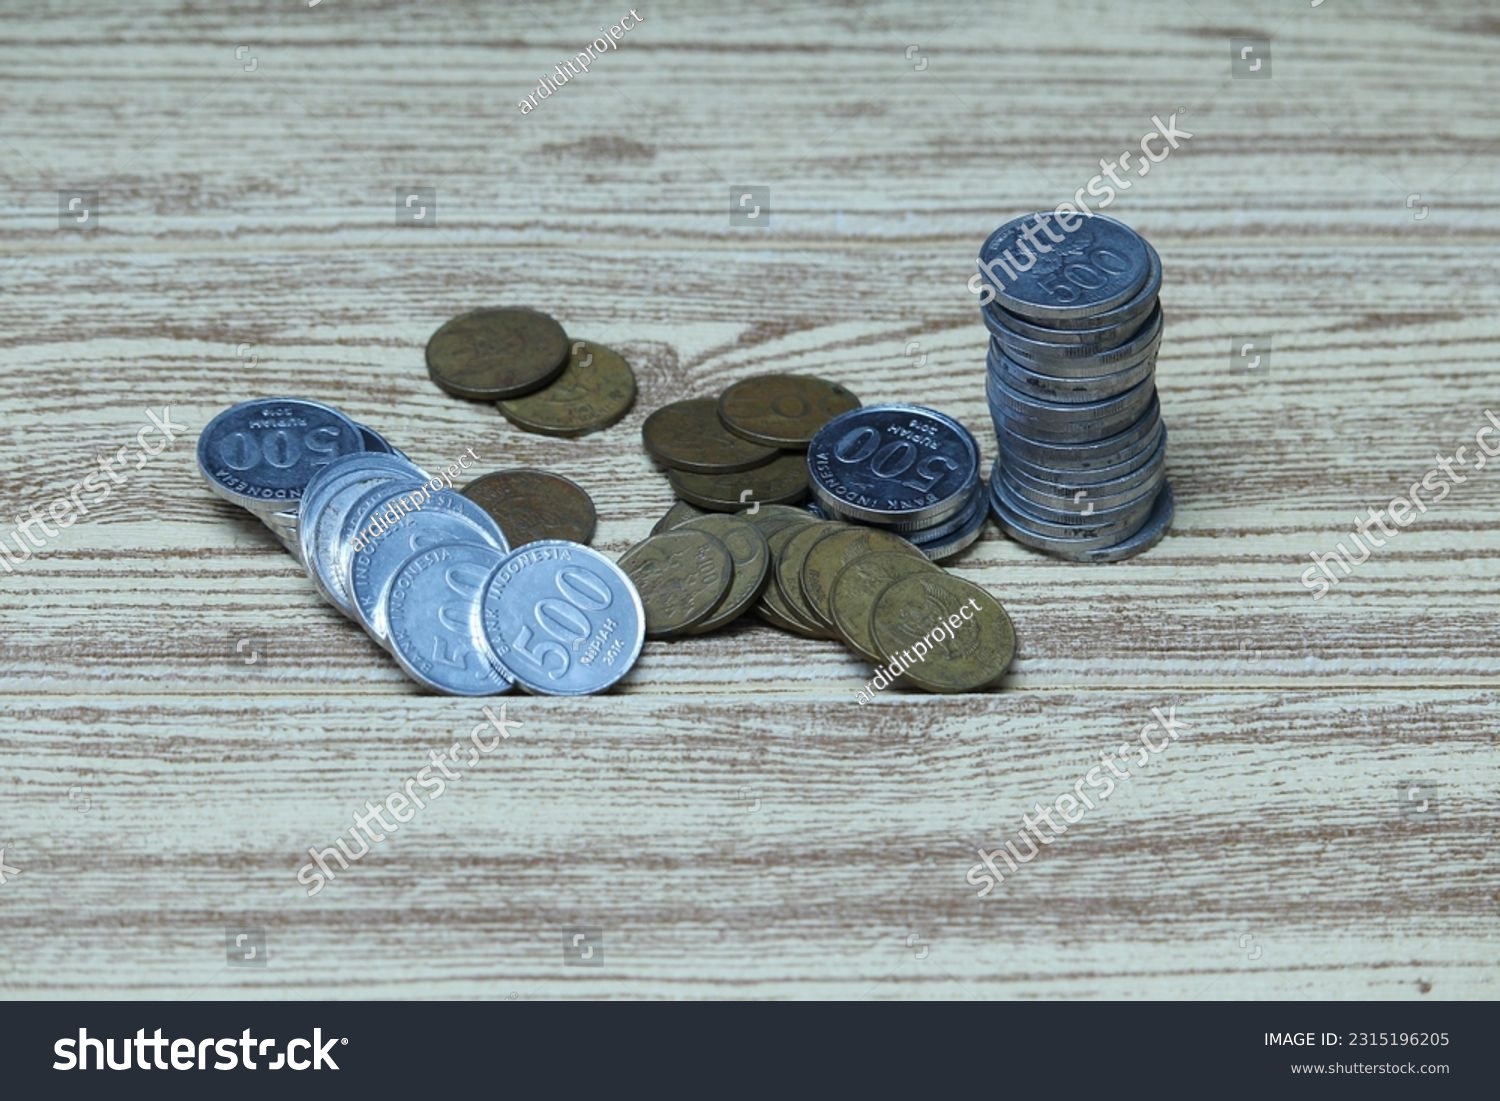 Pile of coins on the table. Financial and business concept. #2315196205